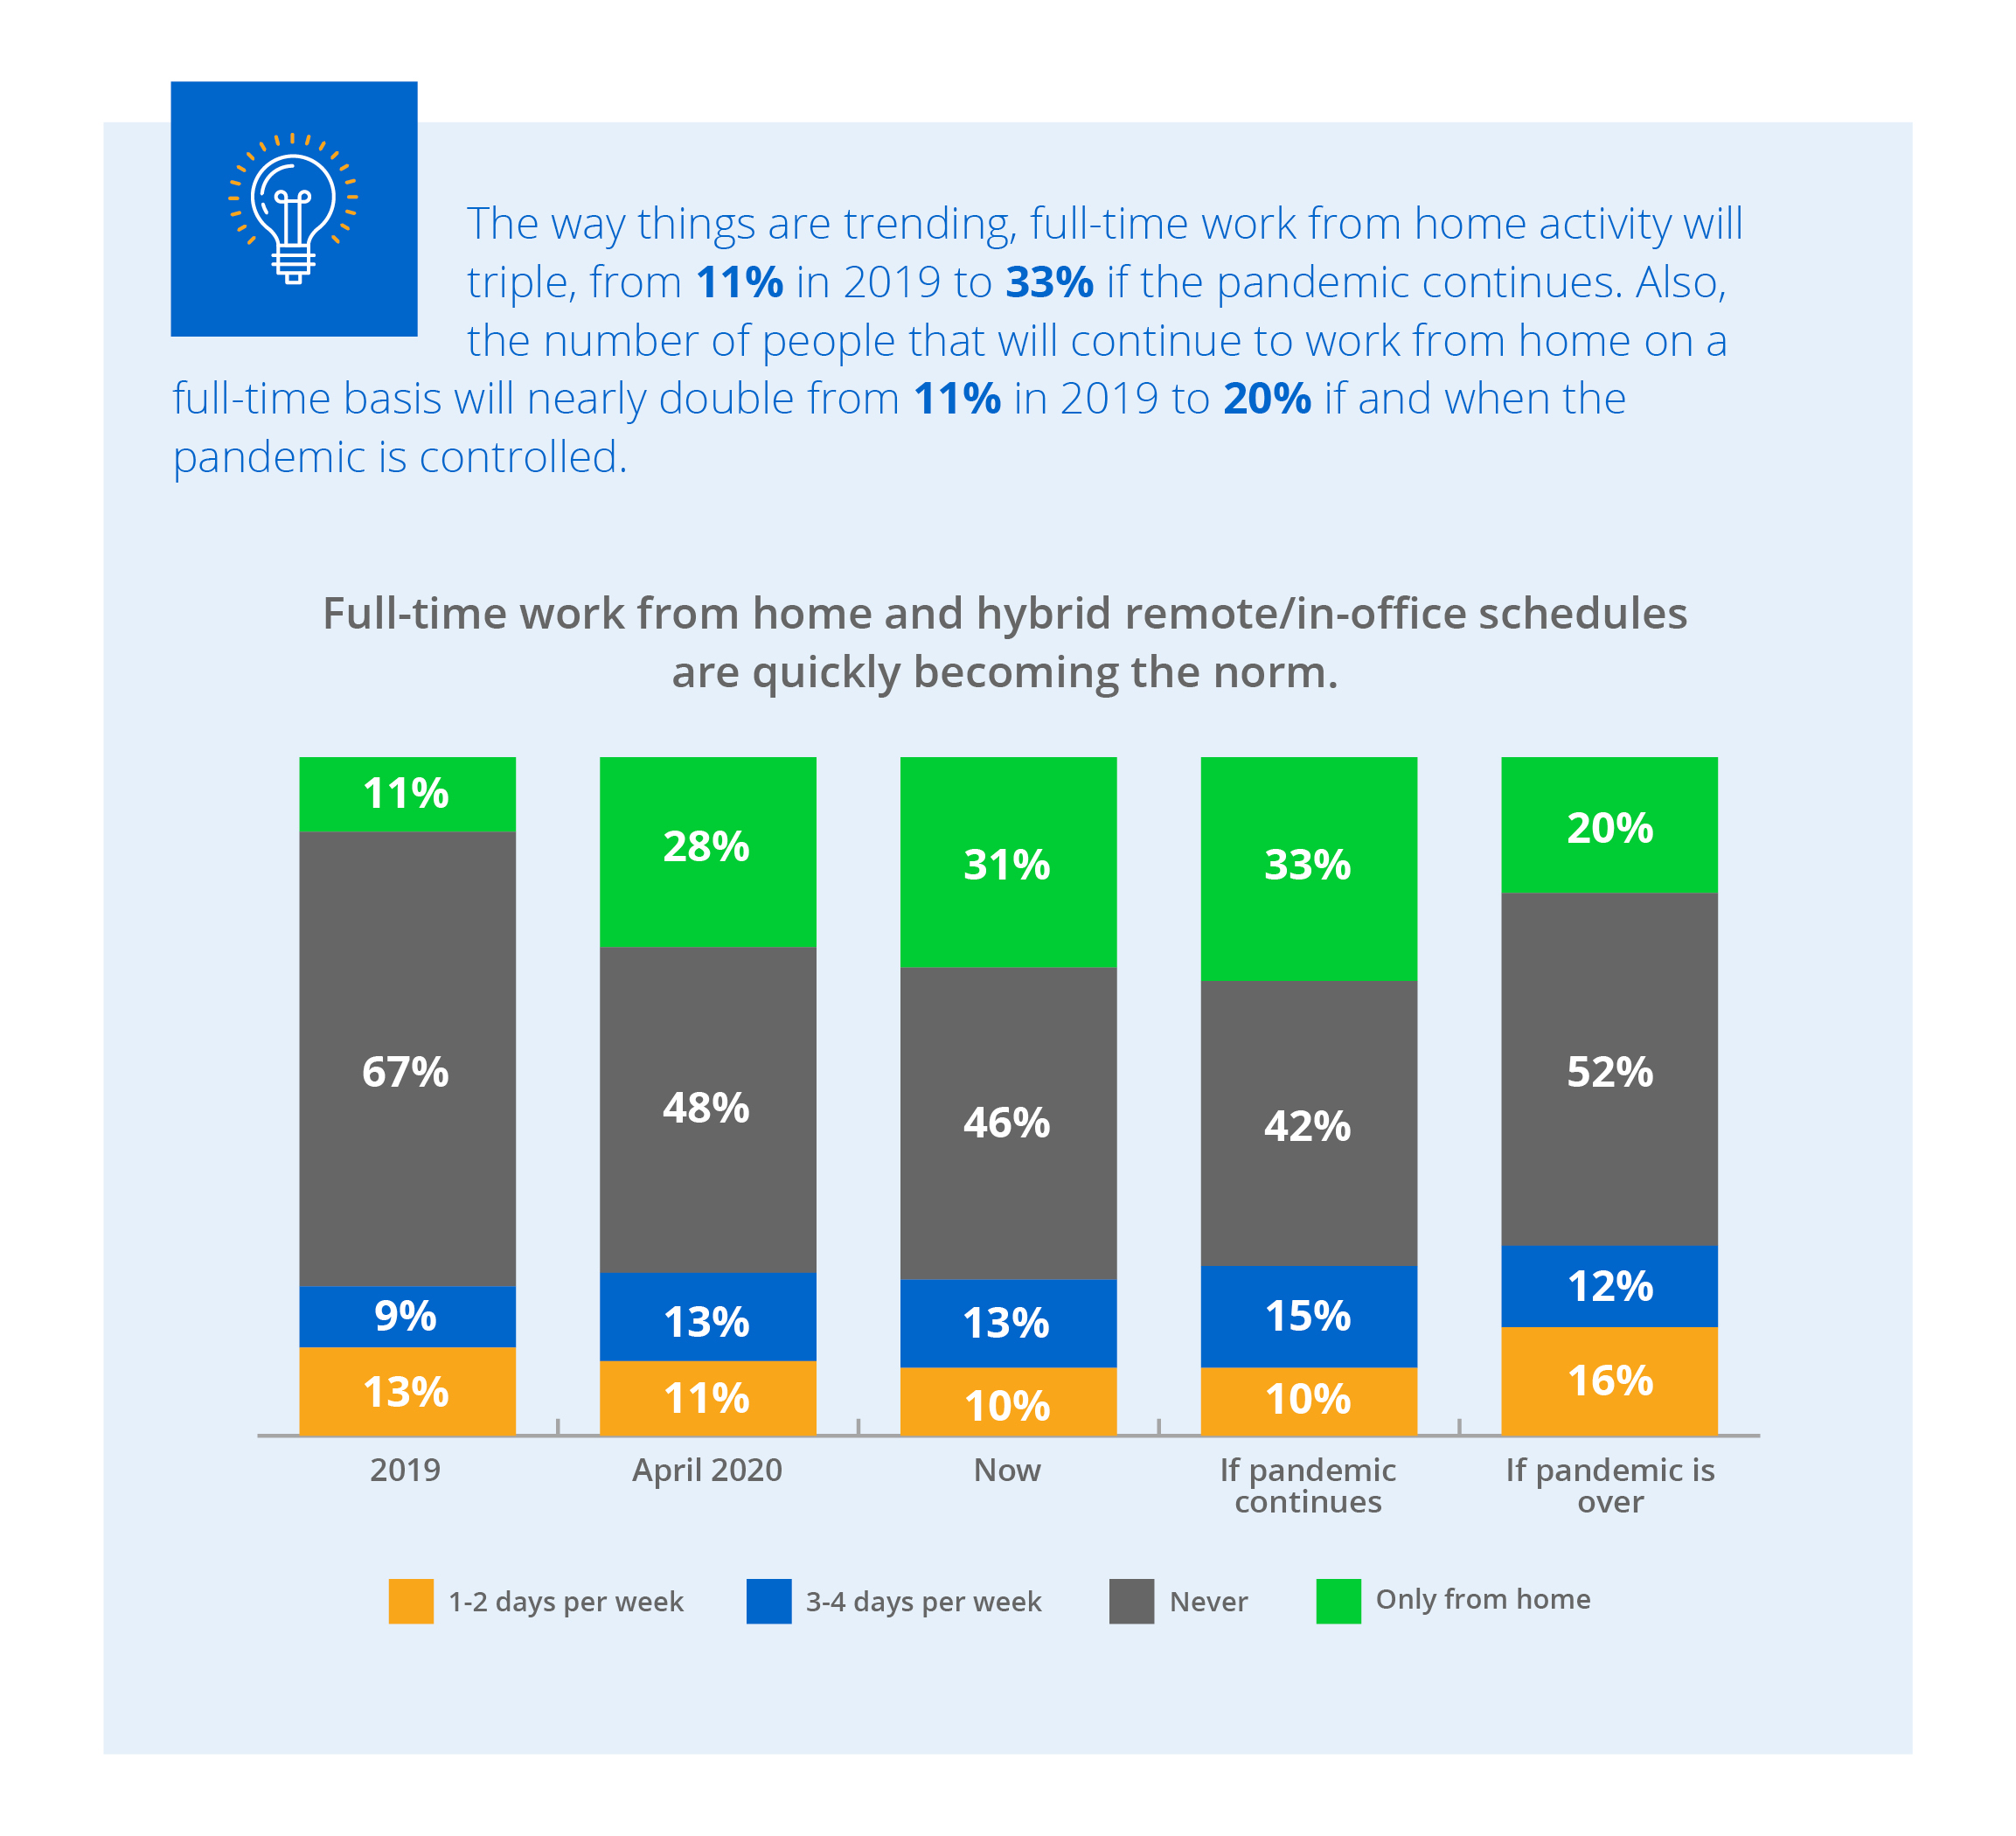 Graph showing full-time work from home and hybrid remote/in-office schedules becoming norm